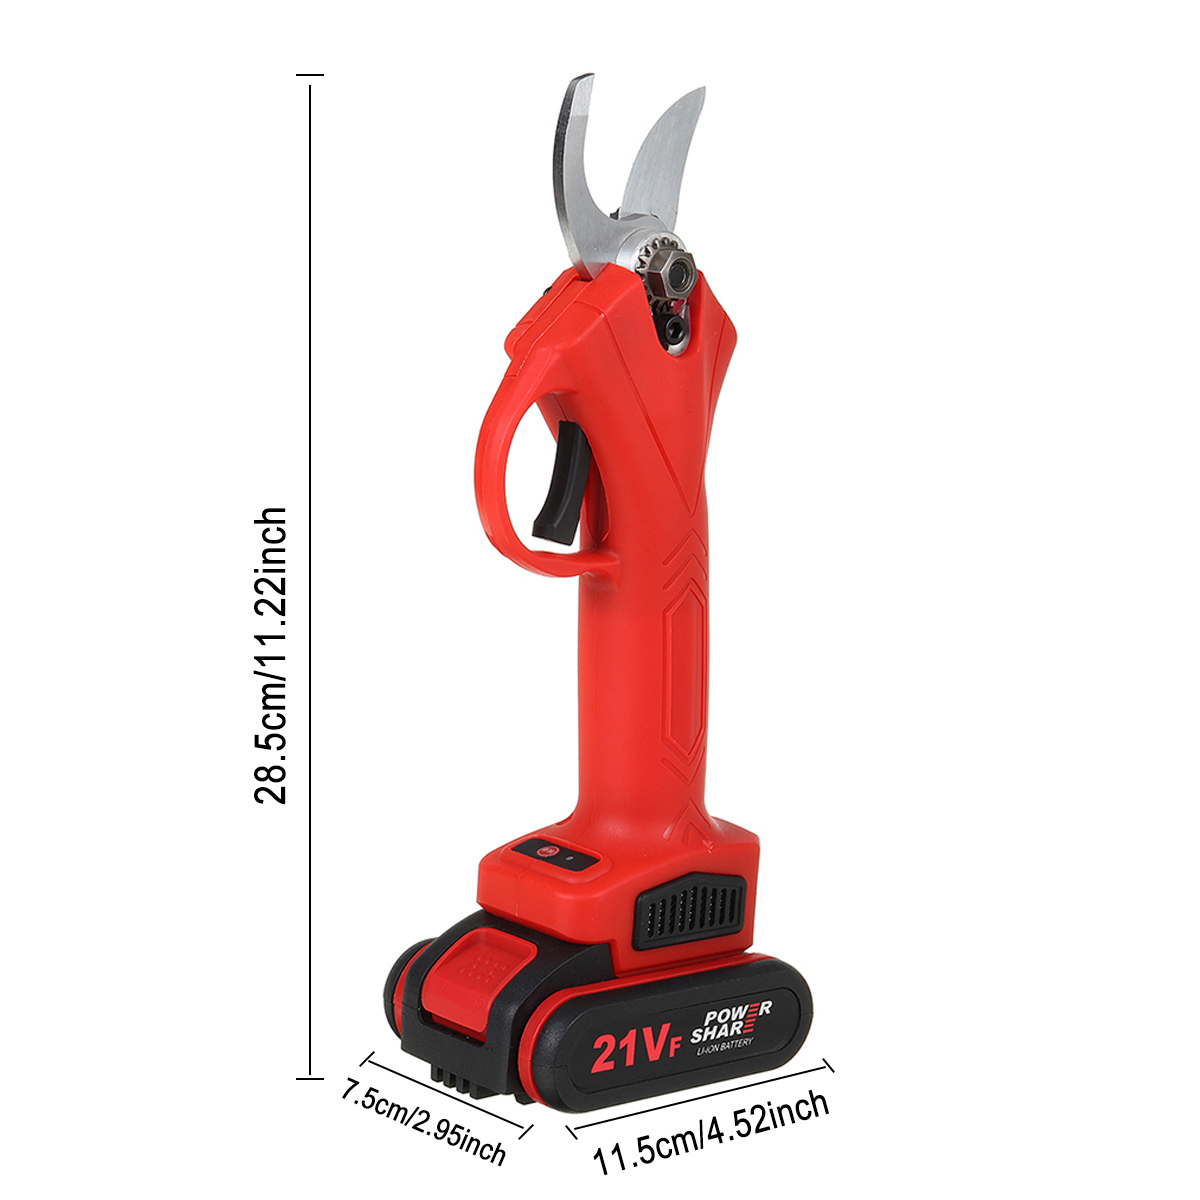 21V-Wireless-25mm-Rechargeable-Electric-Scissors-Branch-Pruning-Shear-Tree-Cutting-Tools-W-2-Battery-1749247-5